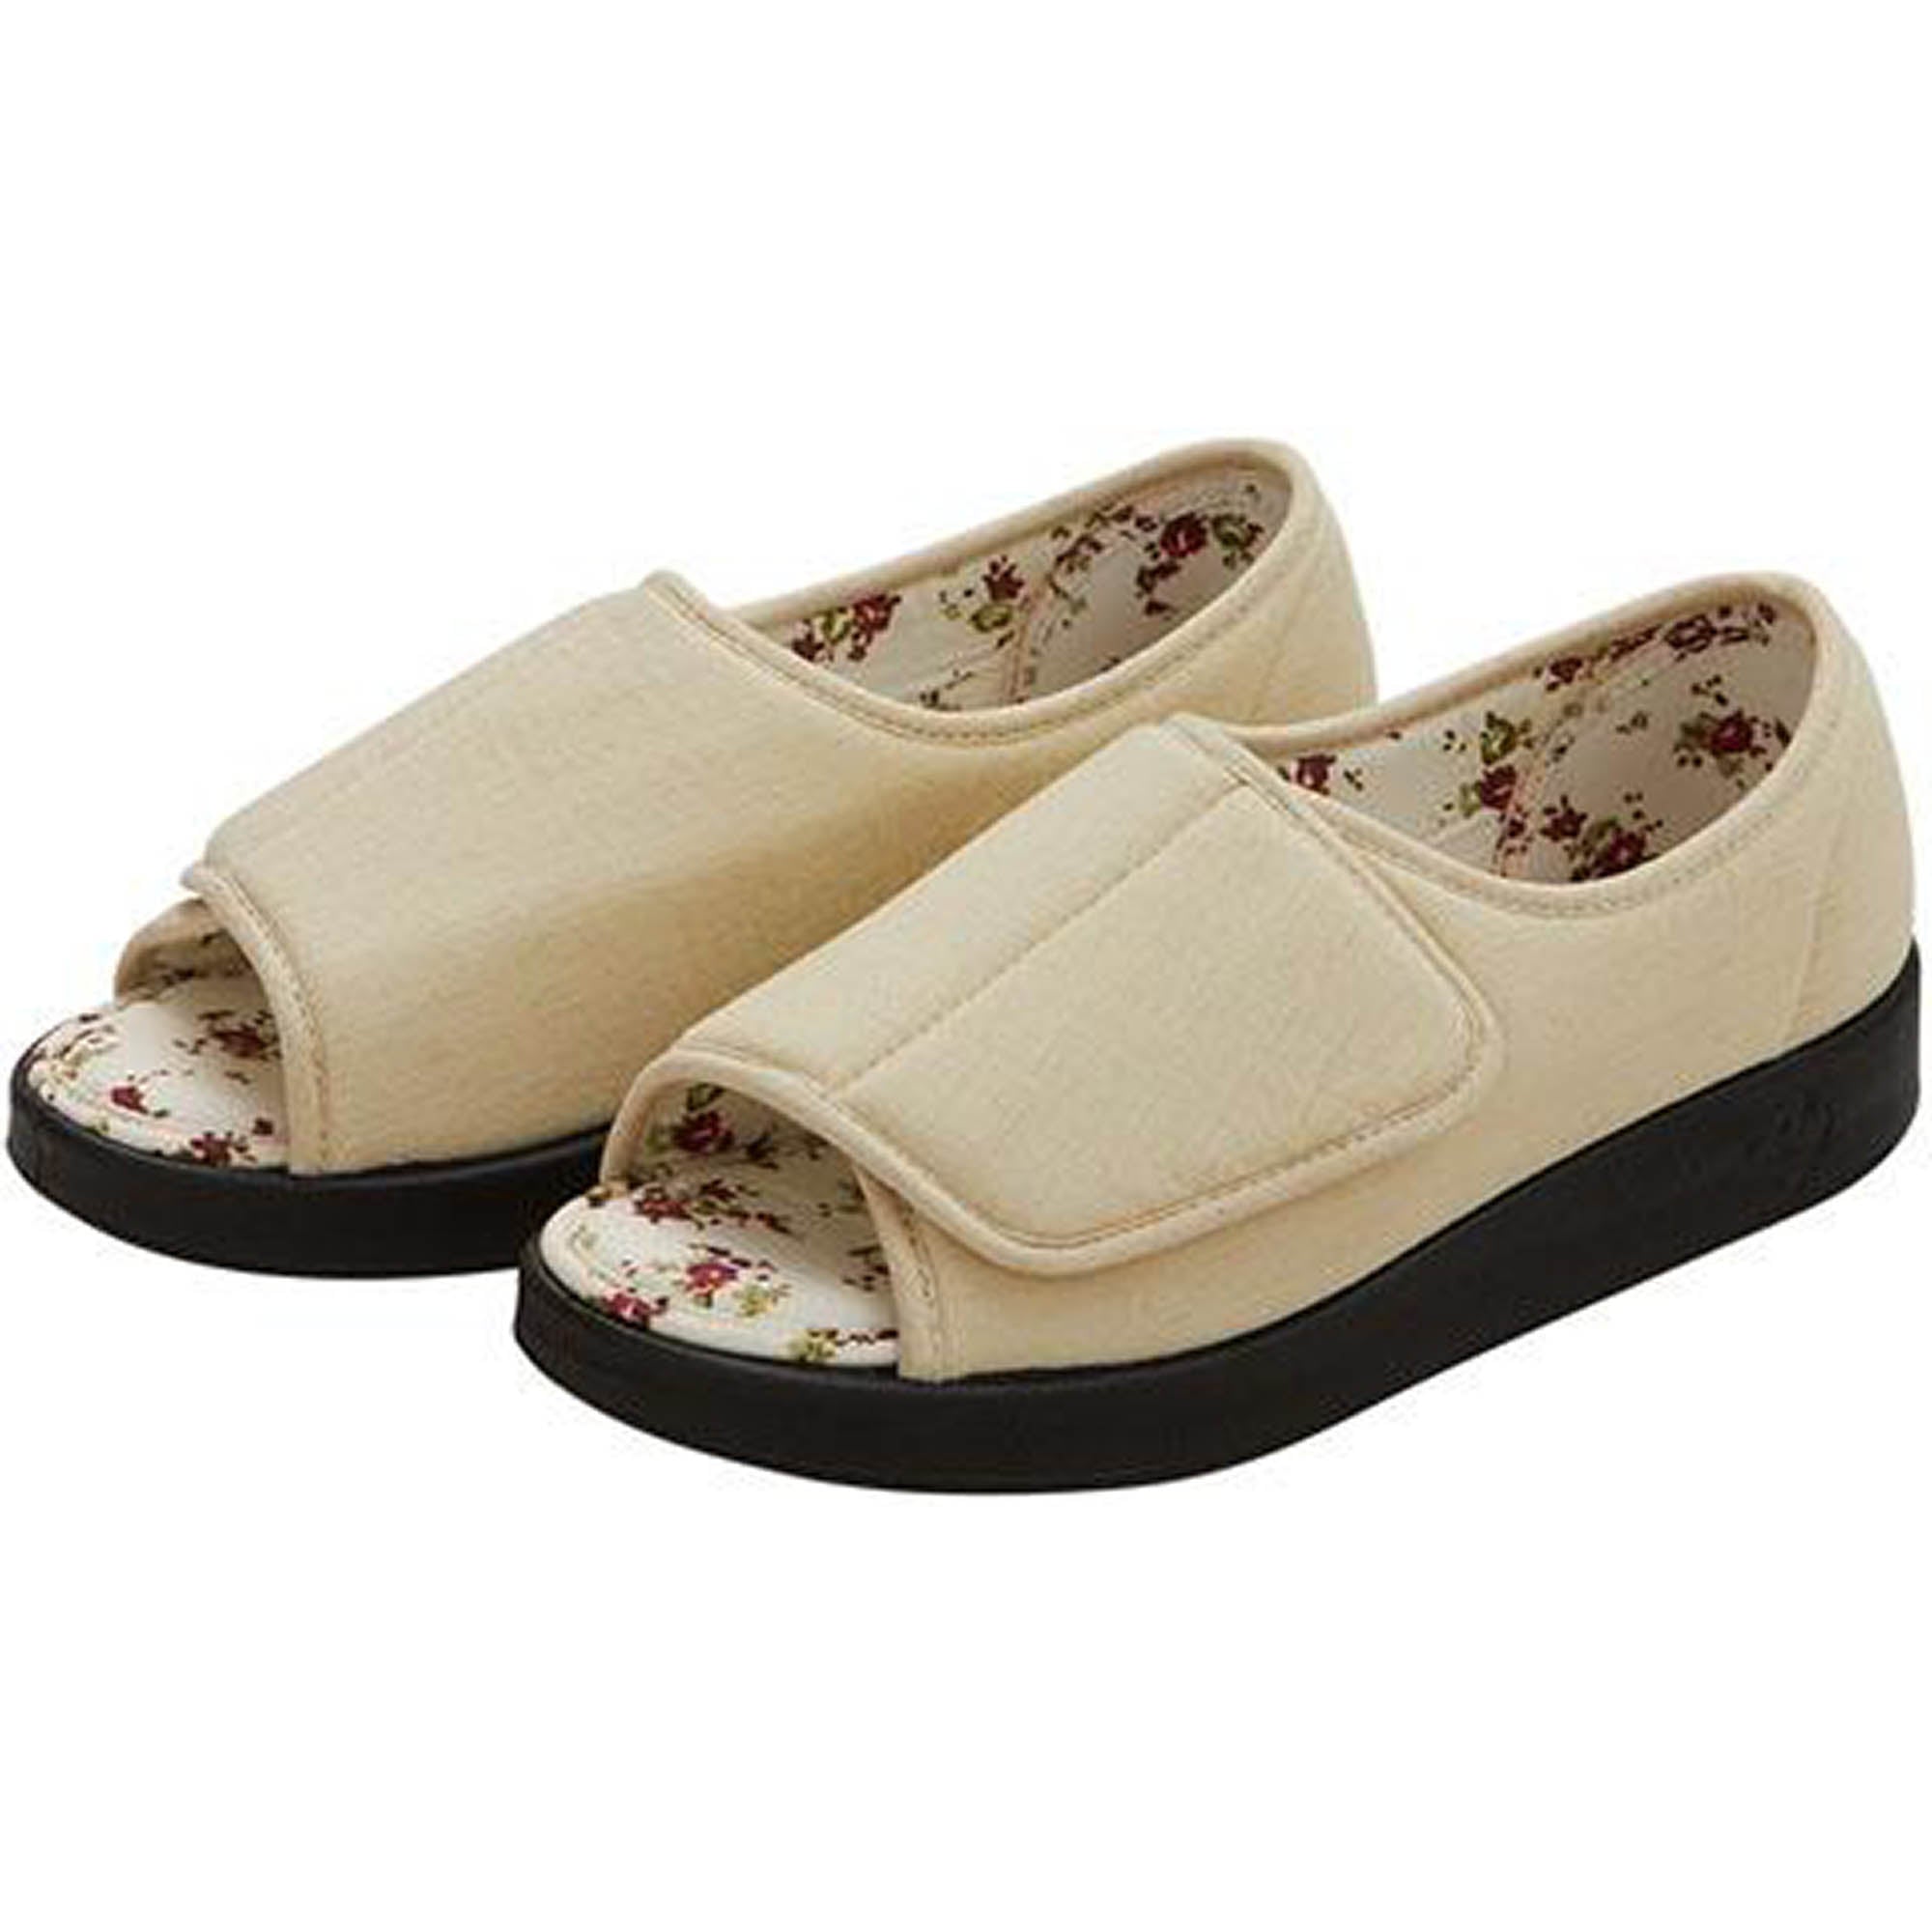 Silverts Women's Extra Wide Open-Toed Shoes - Misty Rose - 11